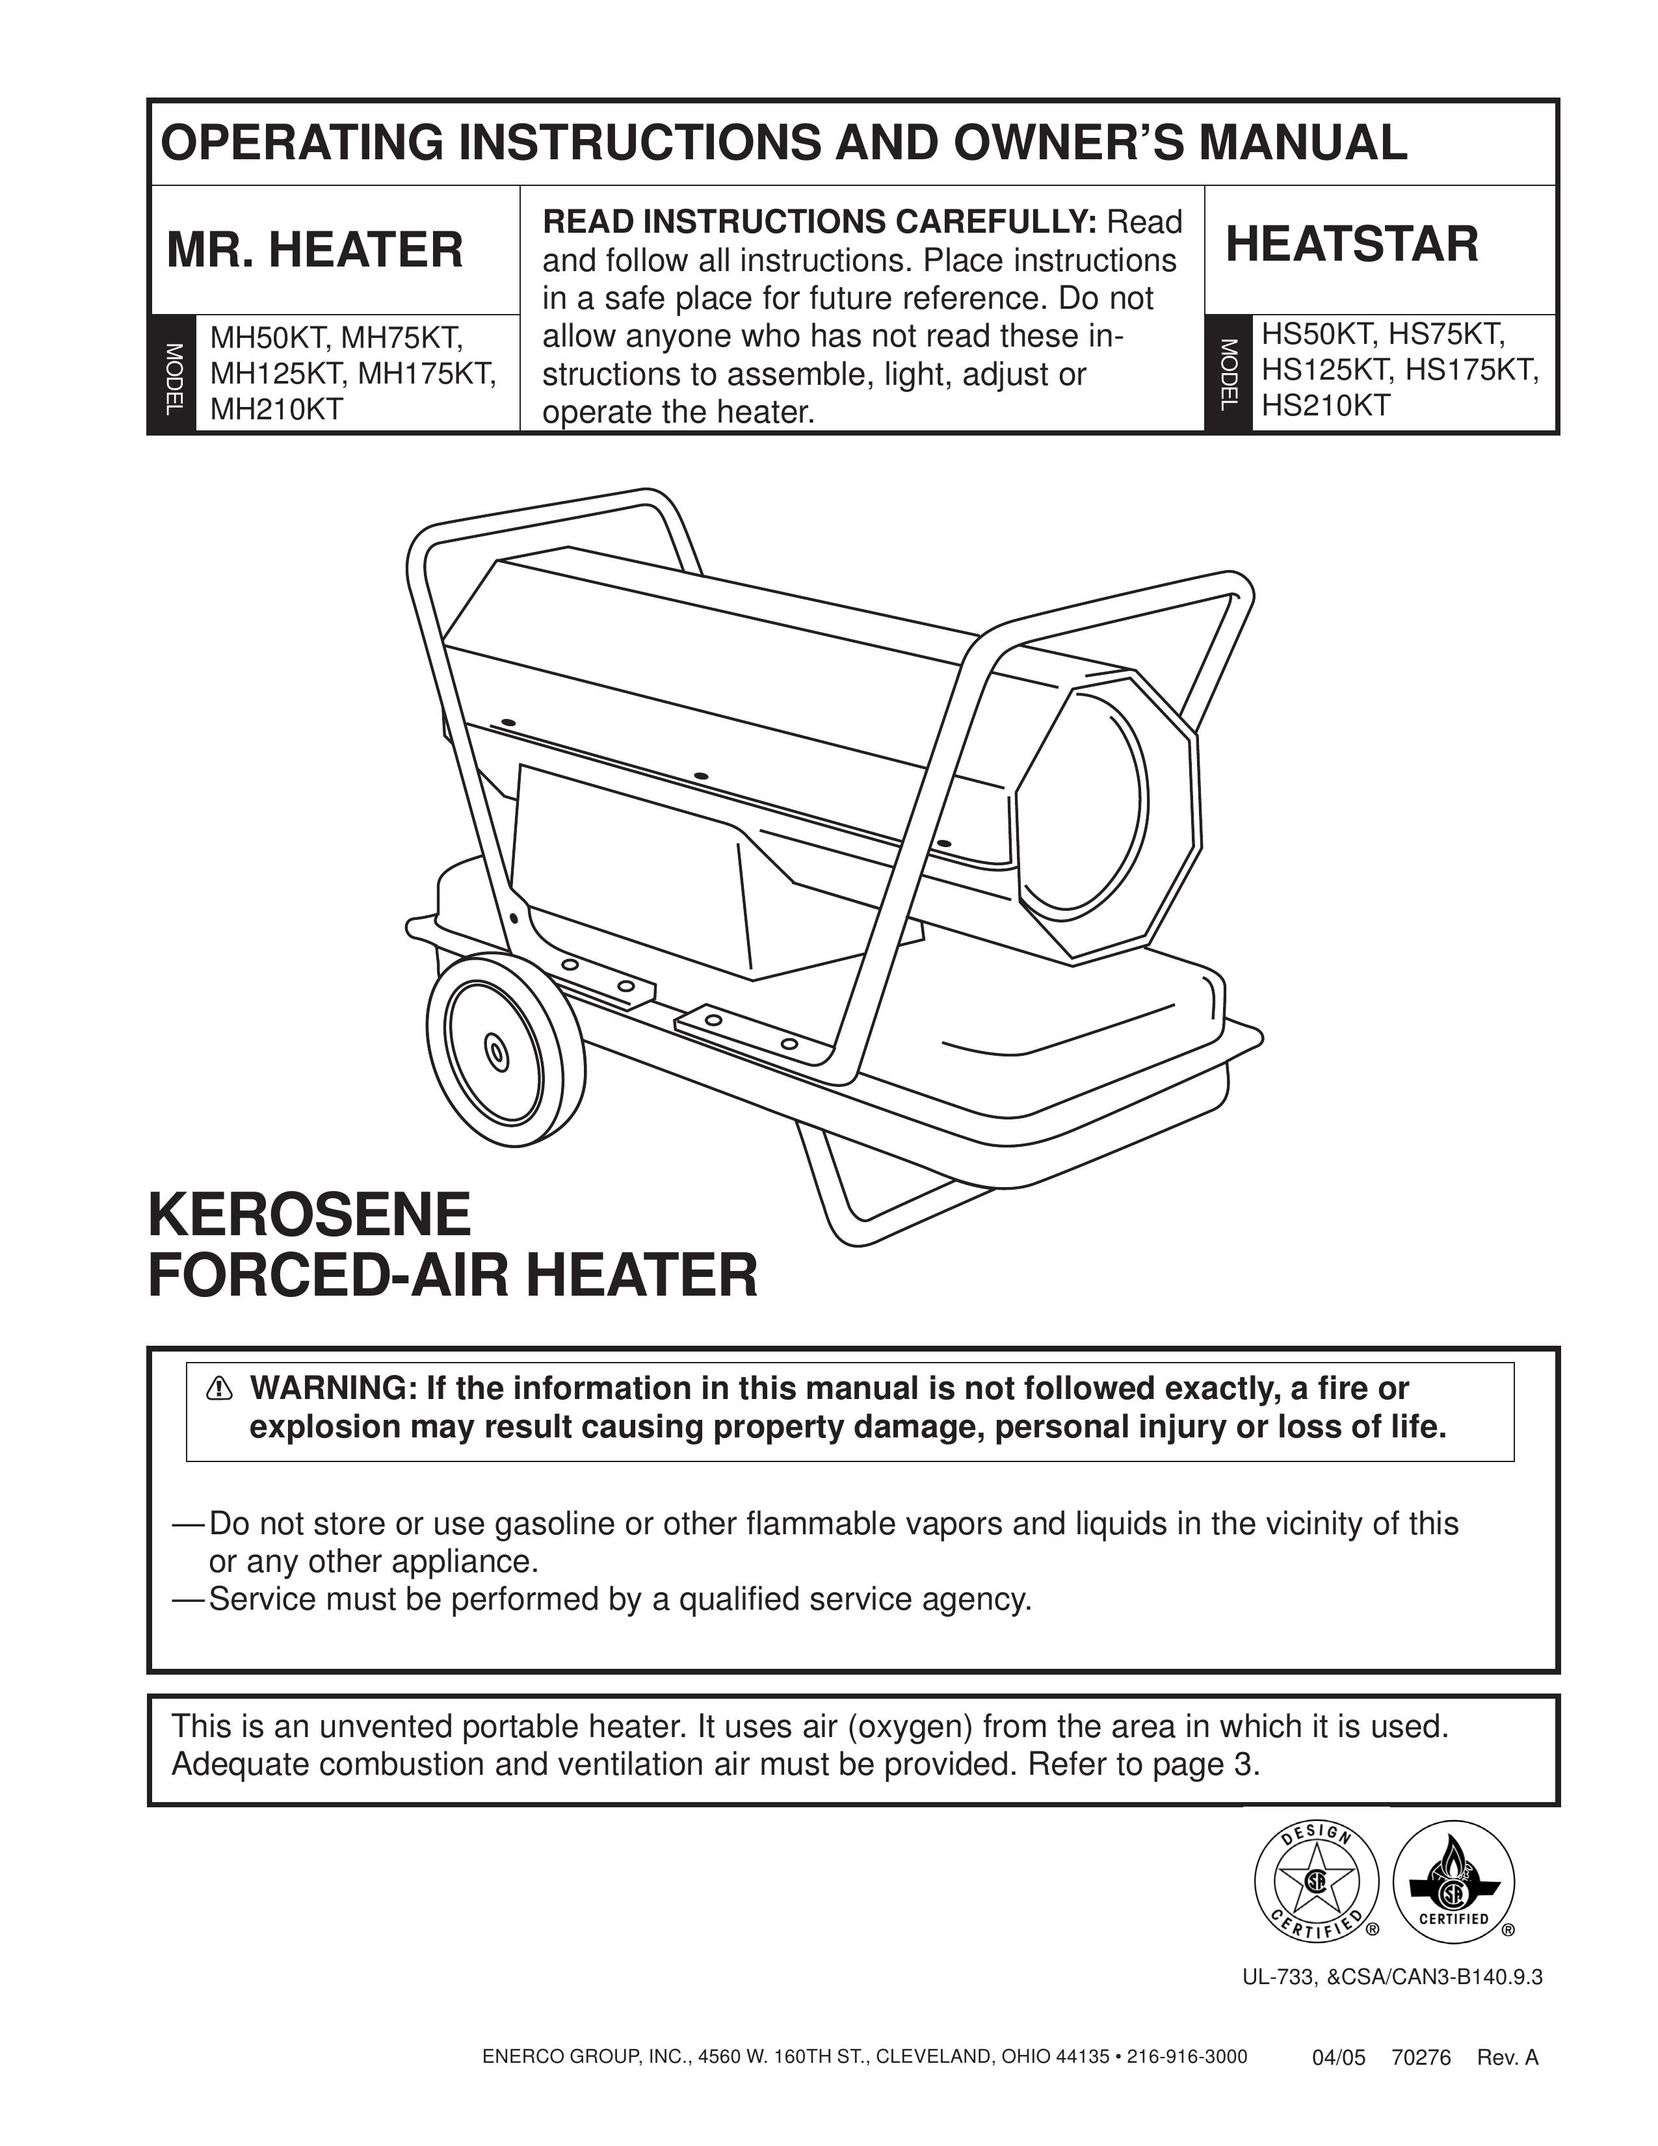 Enerco MH175KT Gas Heater User Manual